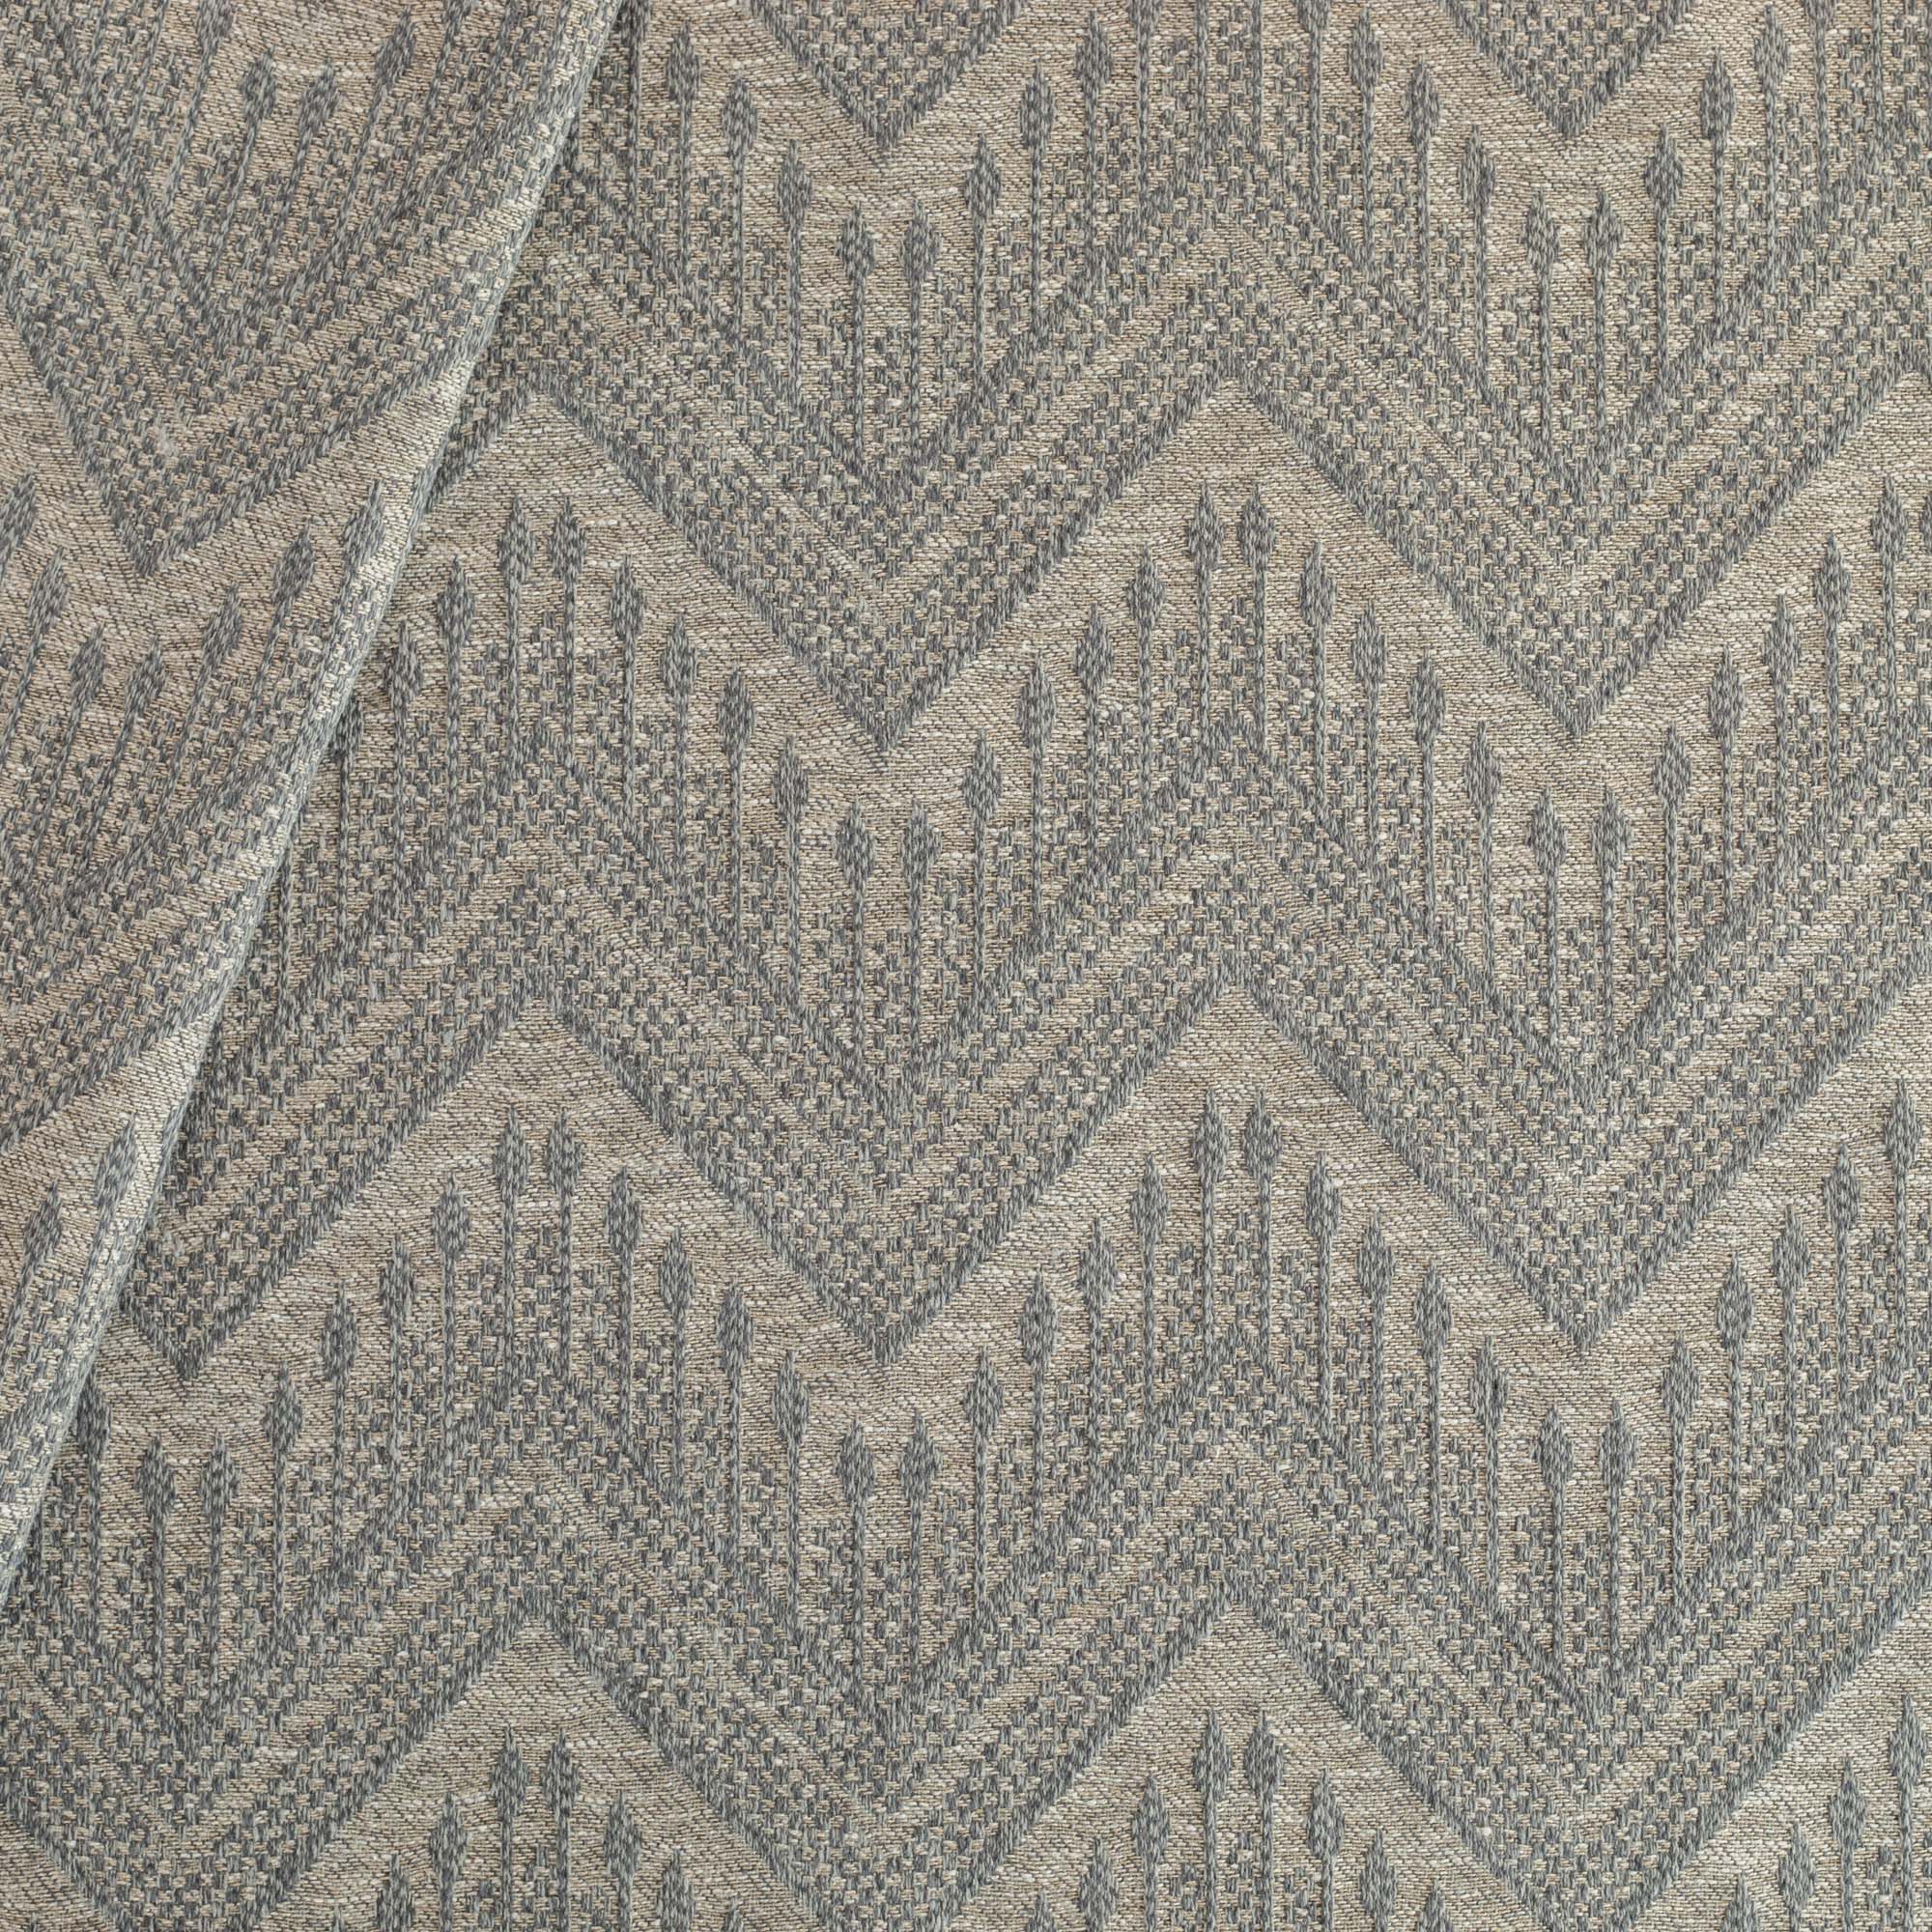 Joyce Fabric denim, a warm grey upholstery fabric with a delicate woven blue geometric zig zag pattern from Tonic Living